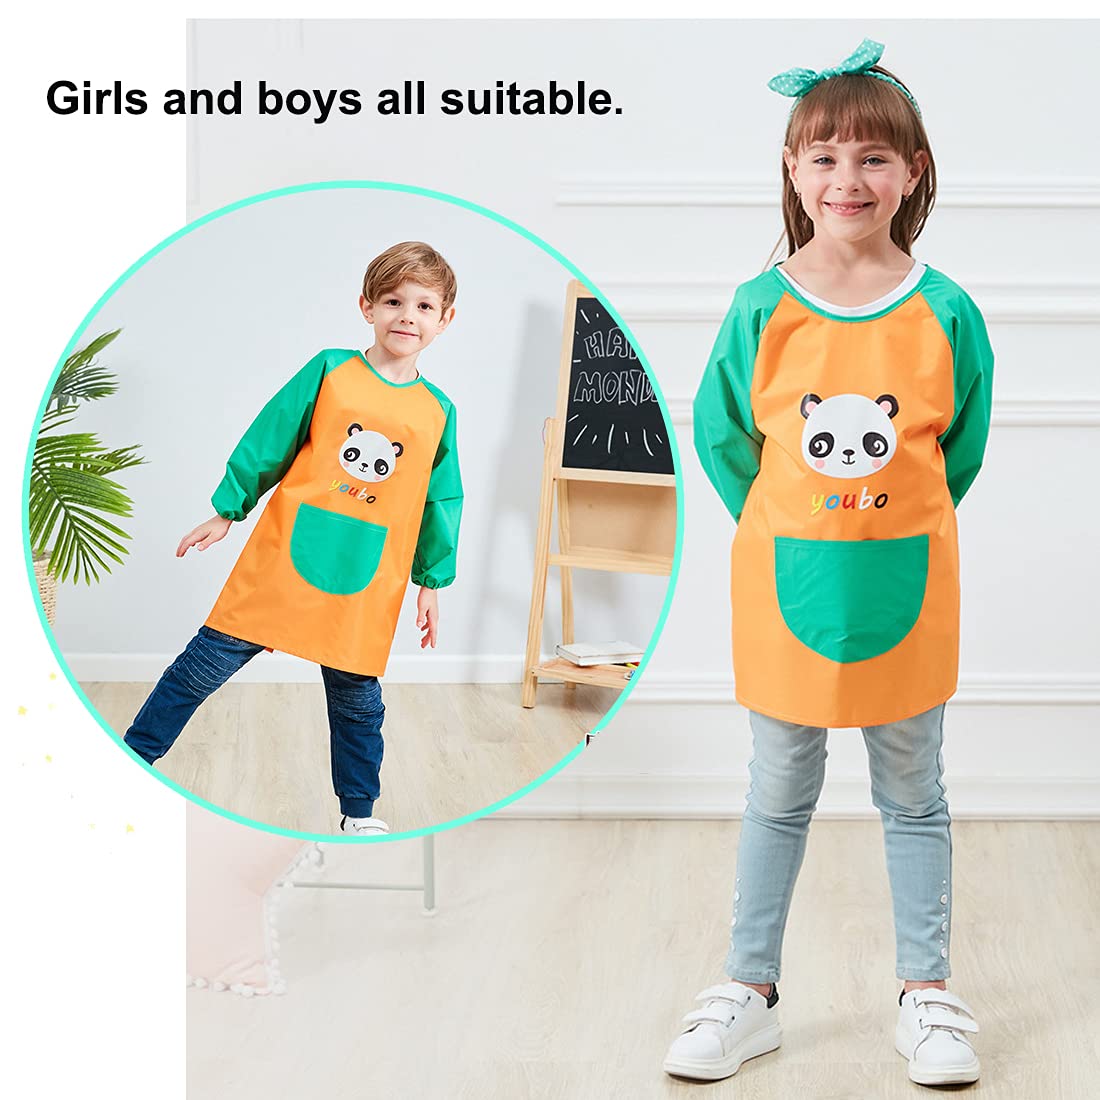 Kids Art Smocks,Long Sleeve Children Smock,Waterproof Anti-oil Kids Apron,With Pockets Art Smock and Apron for Kids.for Age 5-12 Years.